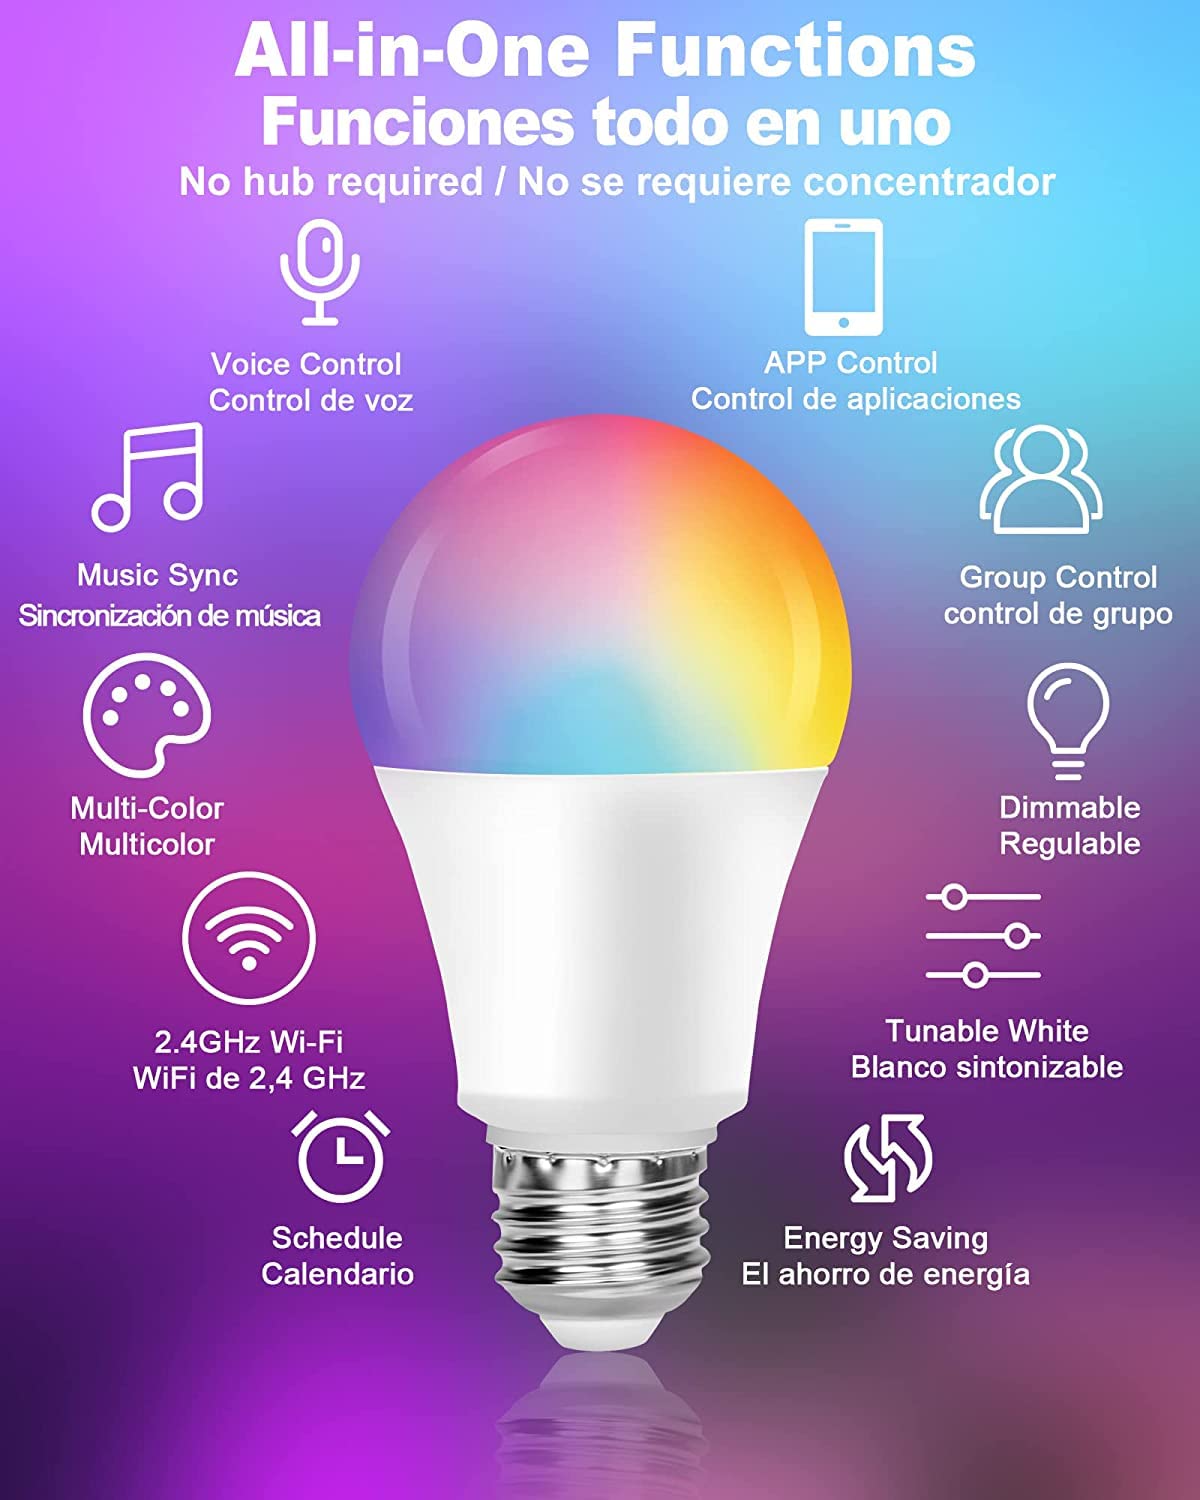 Smart Light Bulbs,Color Changing Light Bulbs That Work with Alexa and Google Assistant,2.4GHz WiFi & Bluetooth Music Sync Multicolor LED Bulbs,7W(60W Eqv.) E26 A19 for Smart Home Lighting-4PACK